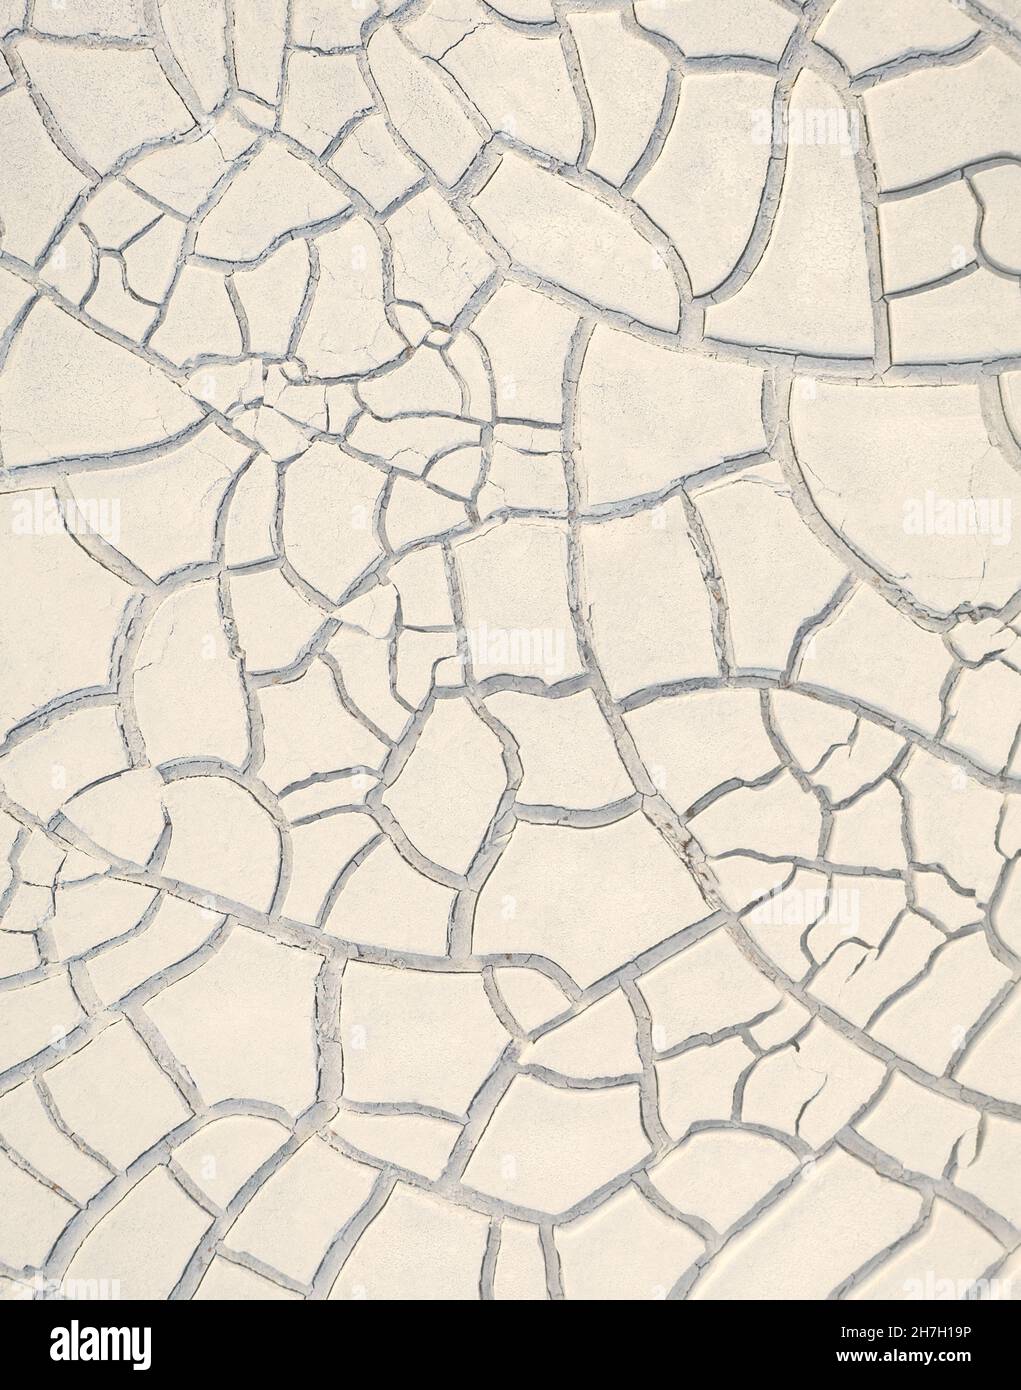 Cracked white clay on dried lakebed, natural beige pattern Stock Photo